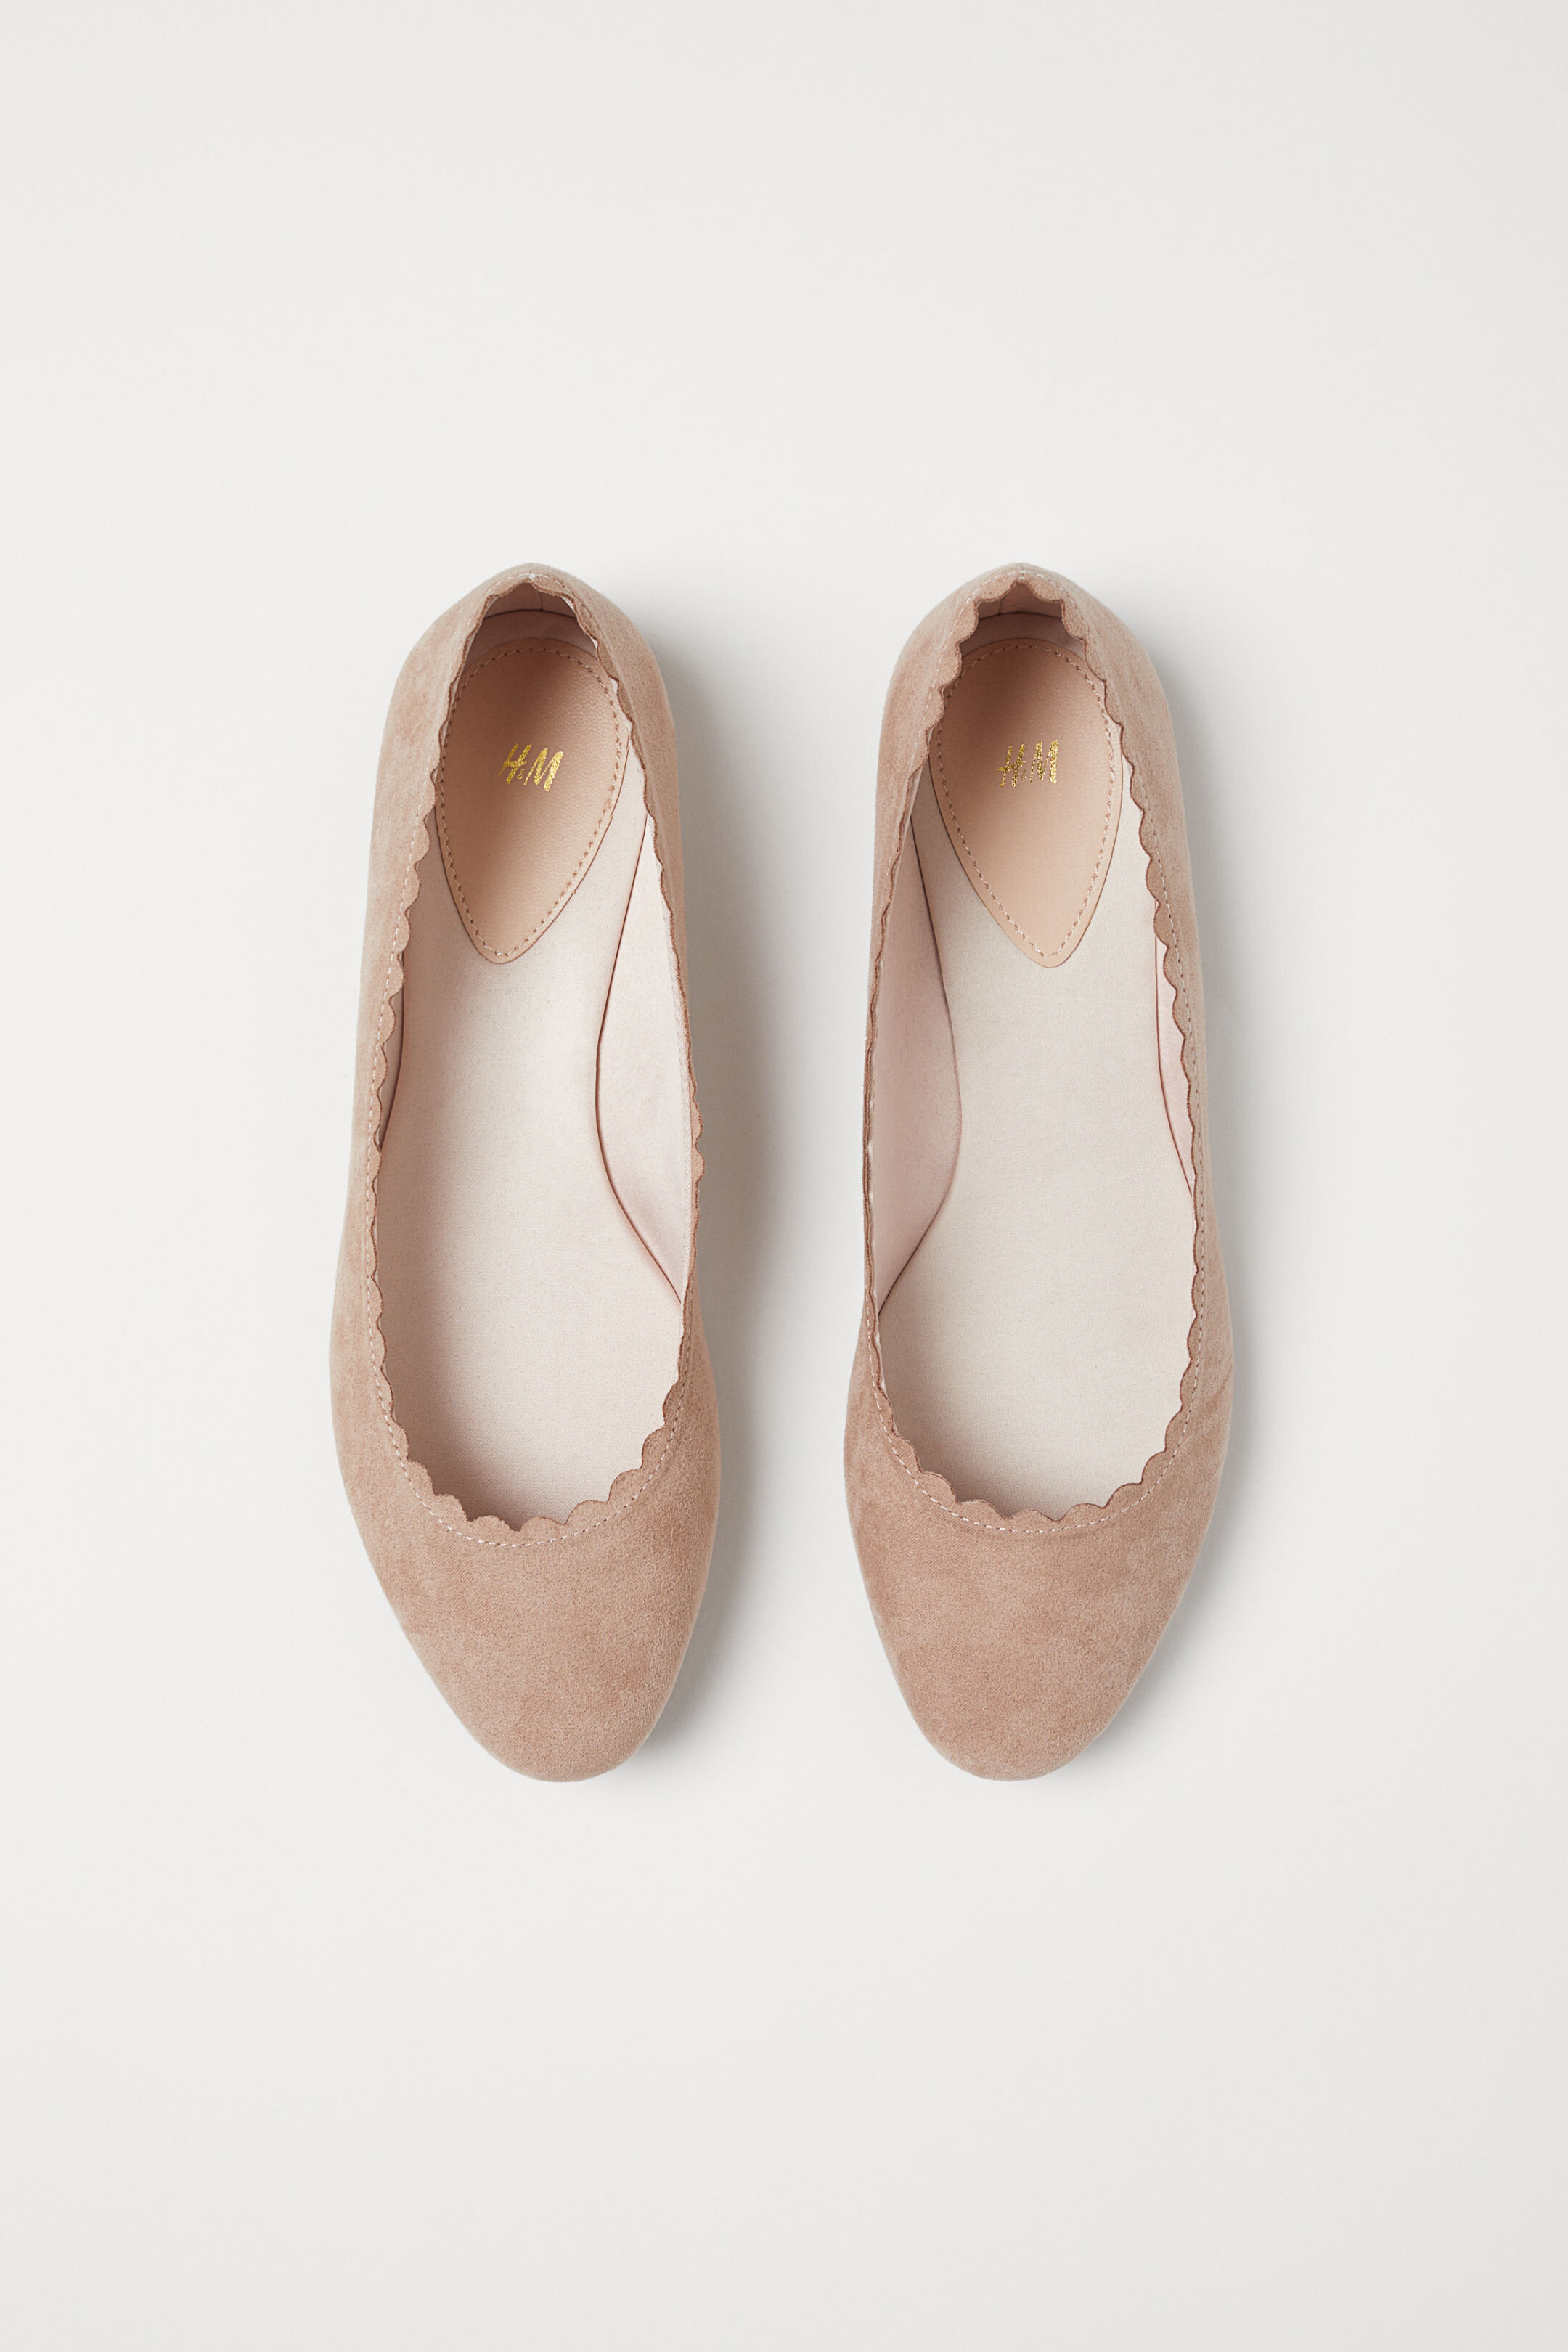 H&M Scallop-Edged Ballet Flats in Dusty Pink.jpg